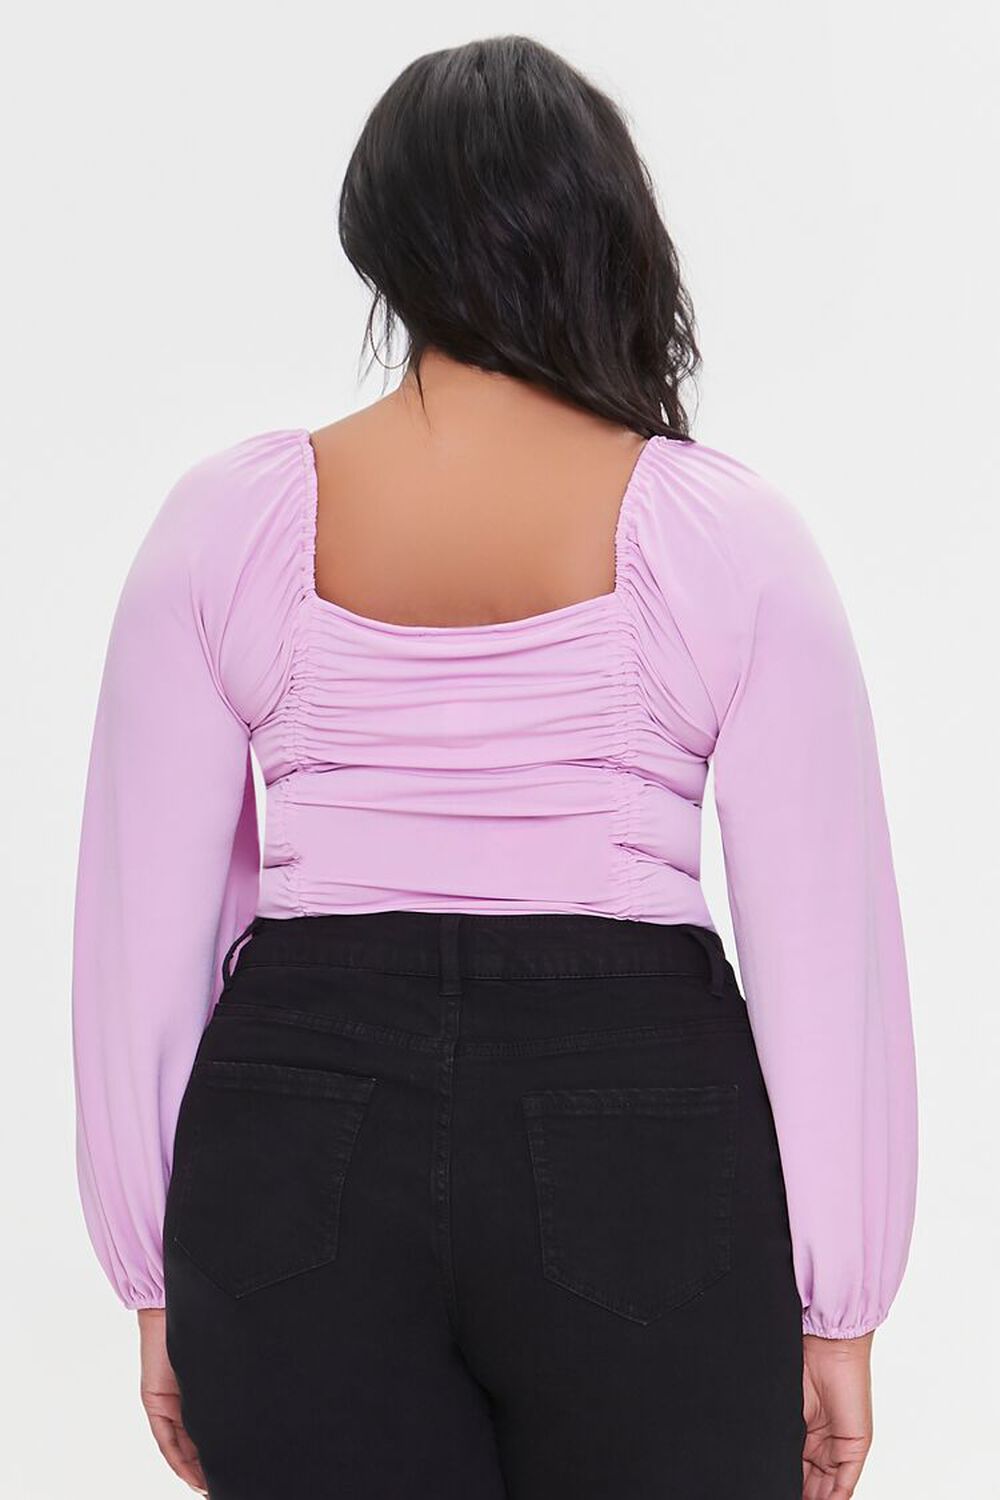 PINK Plus Size Ruched Bodysuit, image 3